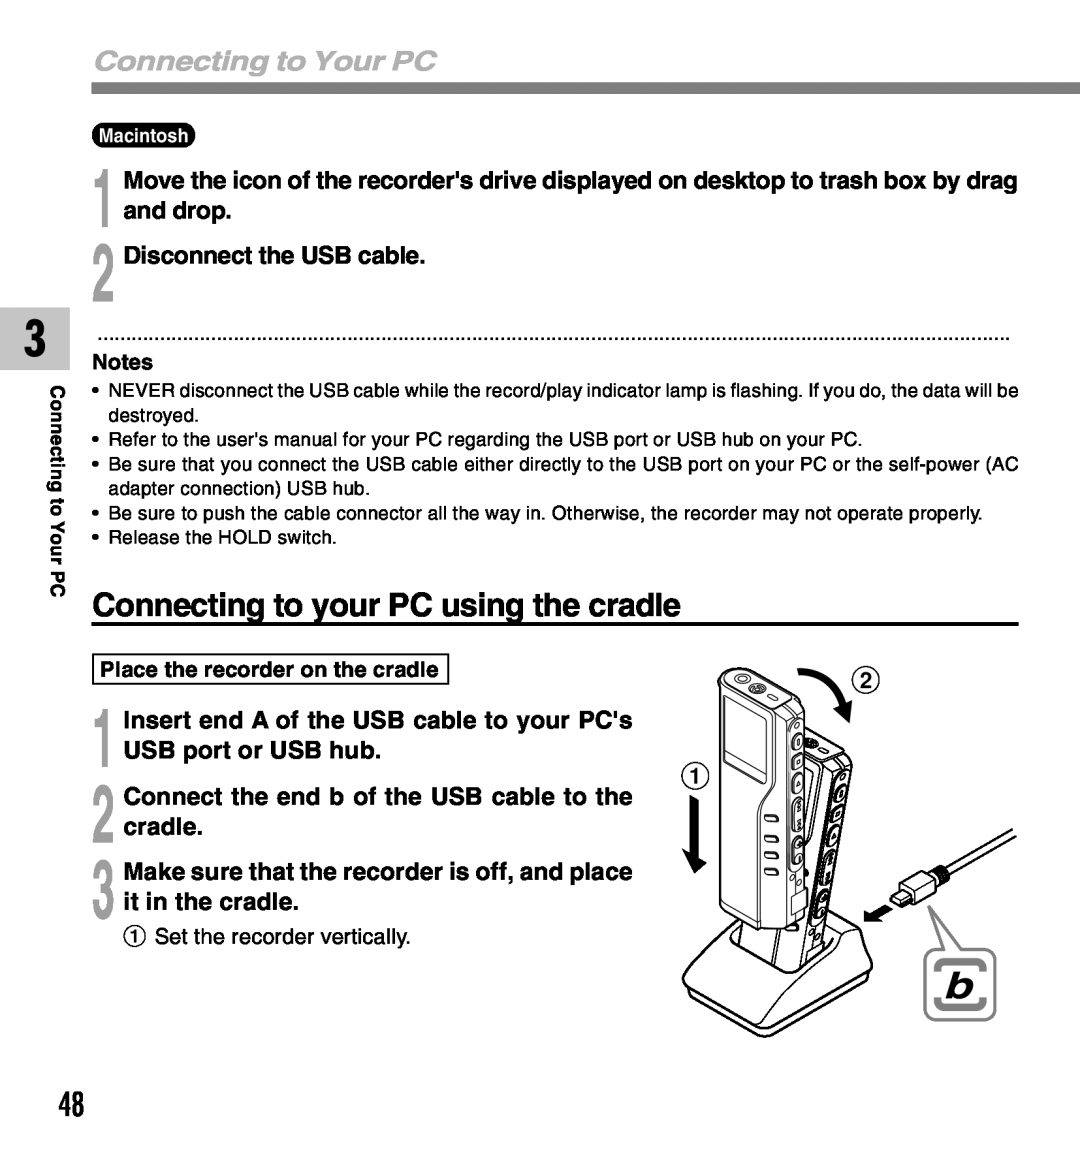 Olympus DM-10, DM-20 manual Connecting to your PC using the cradle, Connecting to Your PC, Disconnect the USB cable 